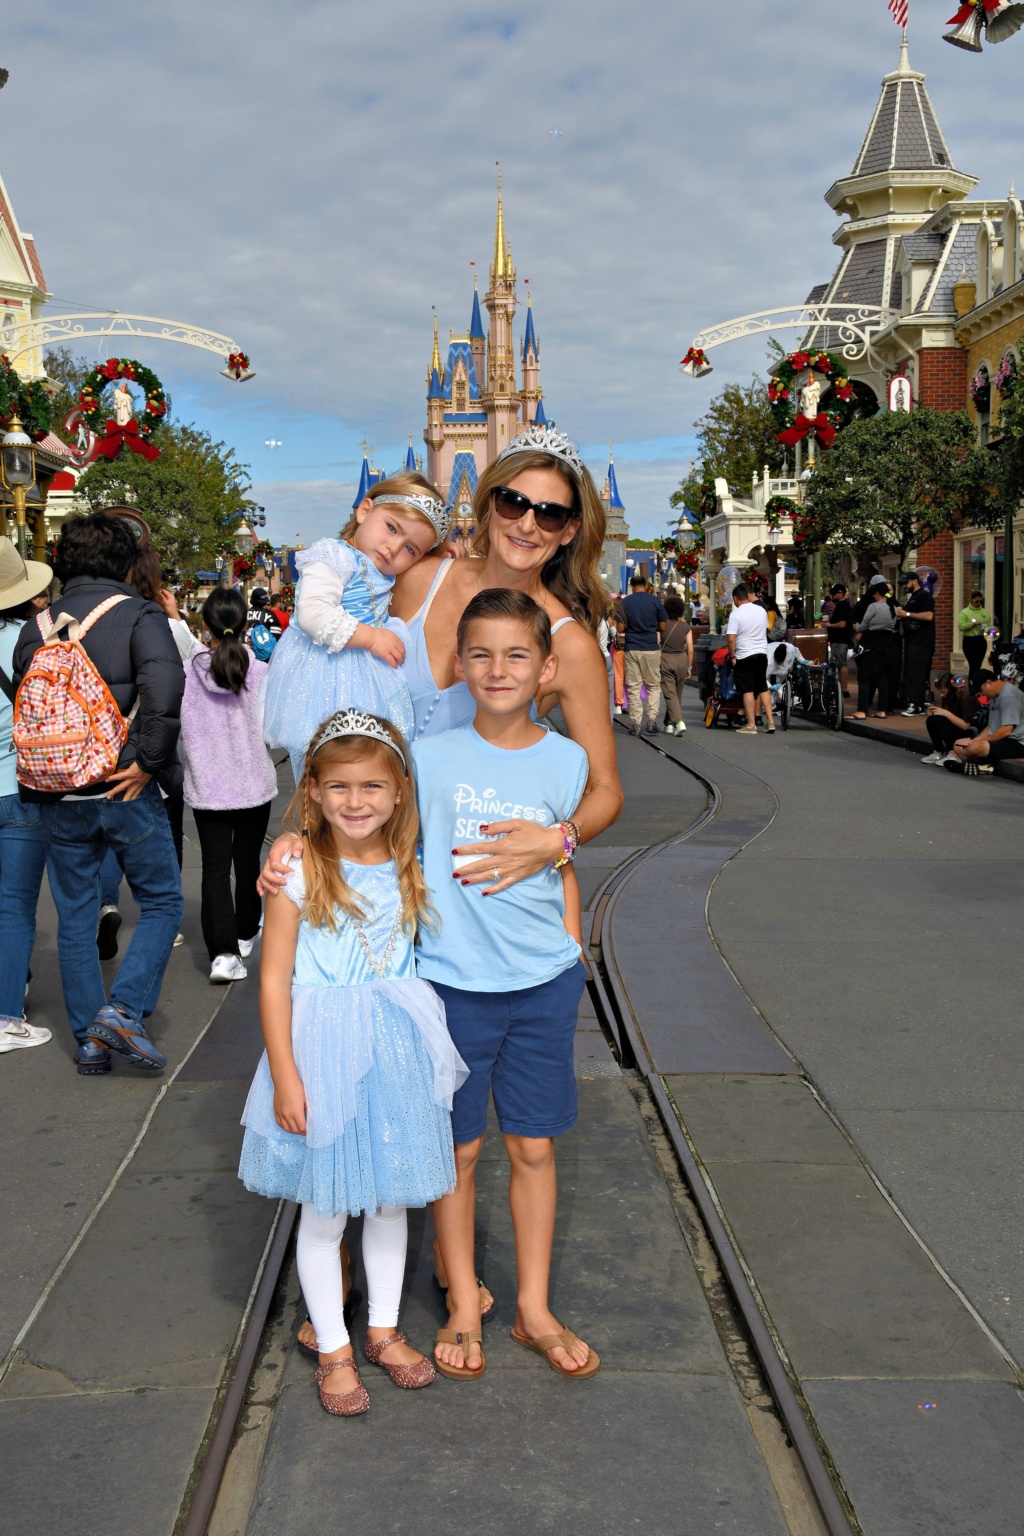 Dr. Kimberly and her family at Disneyland.